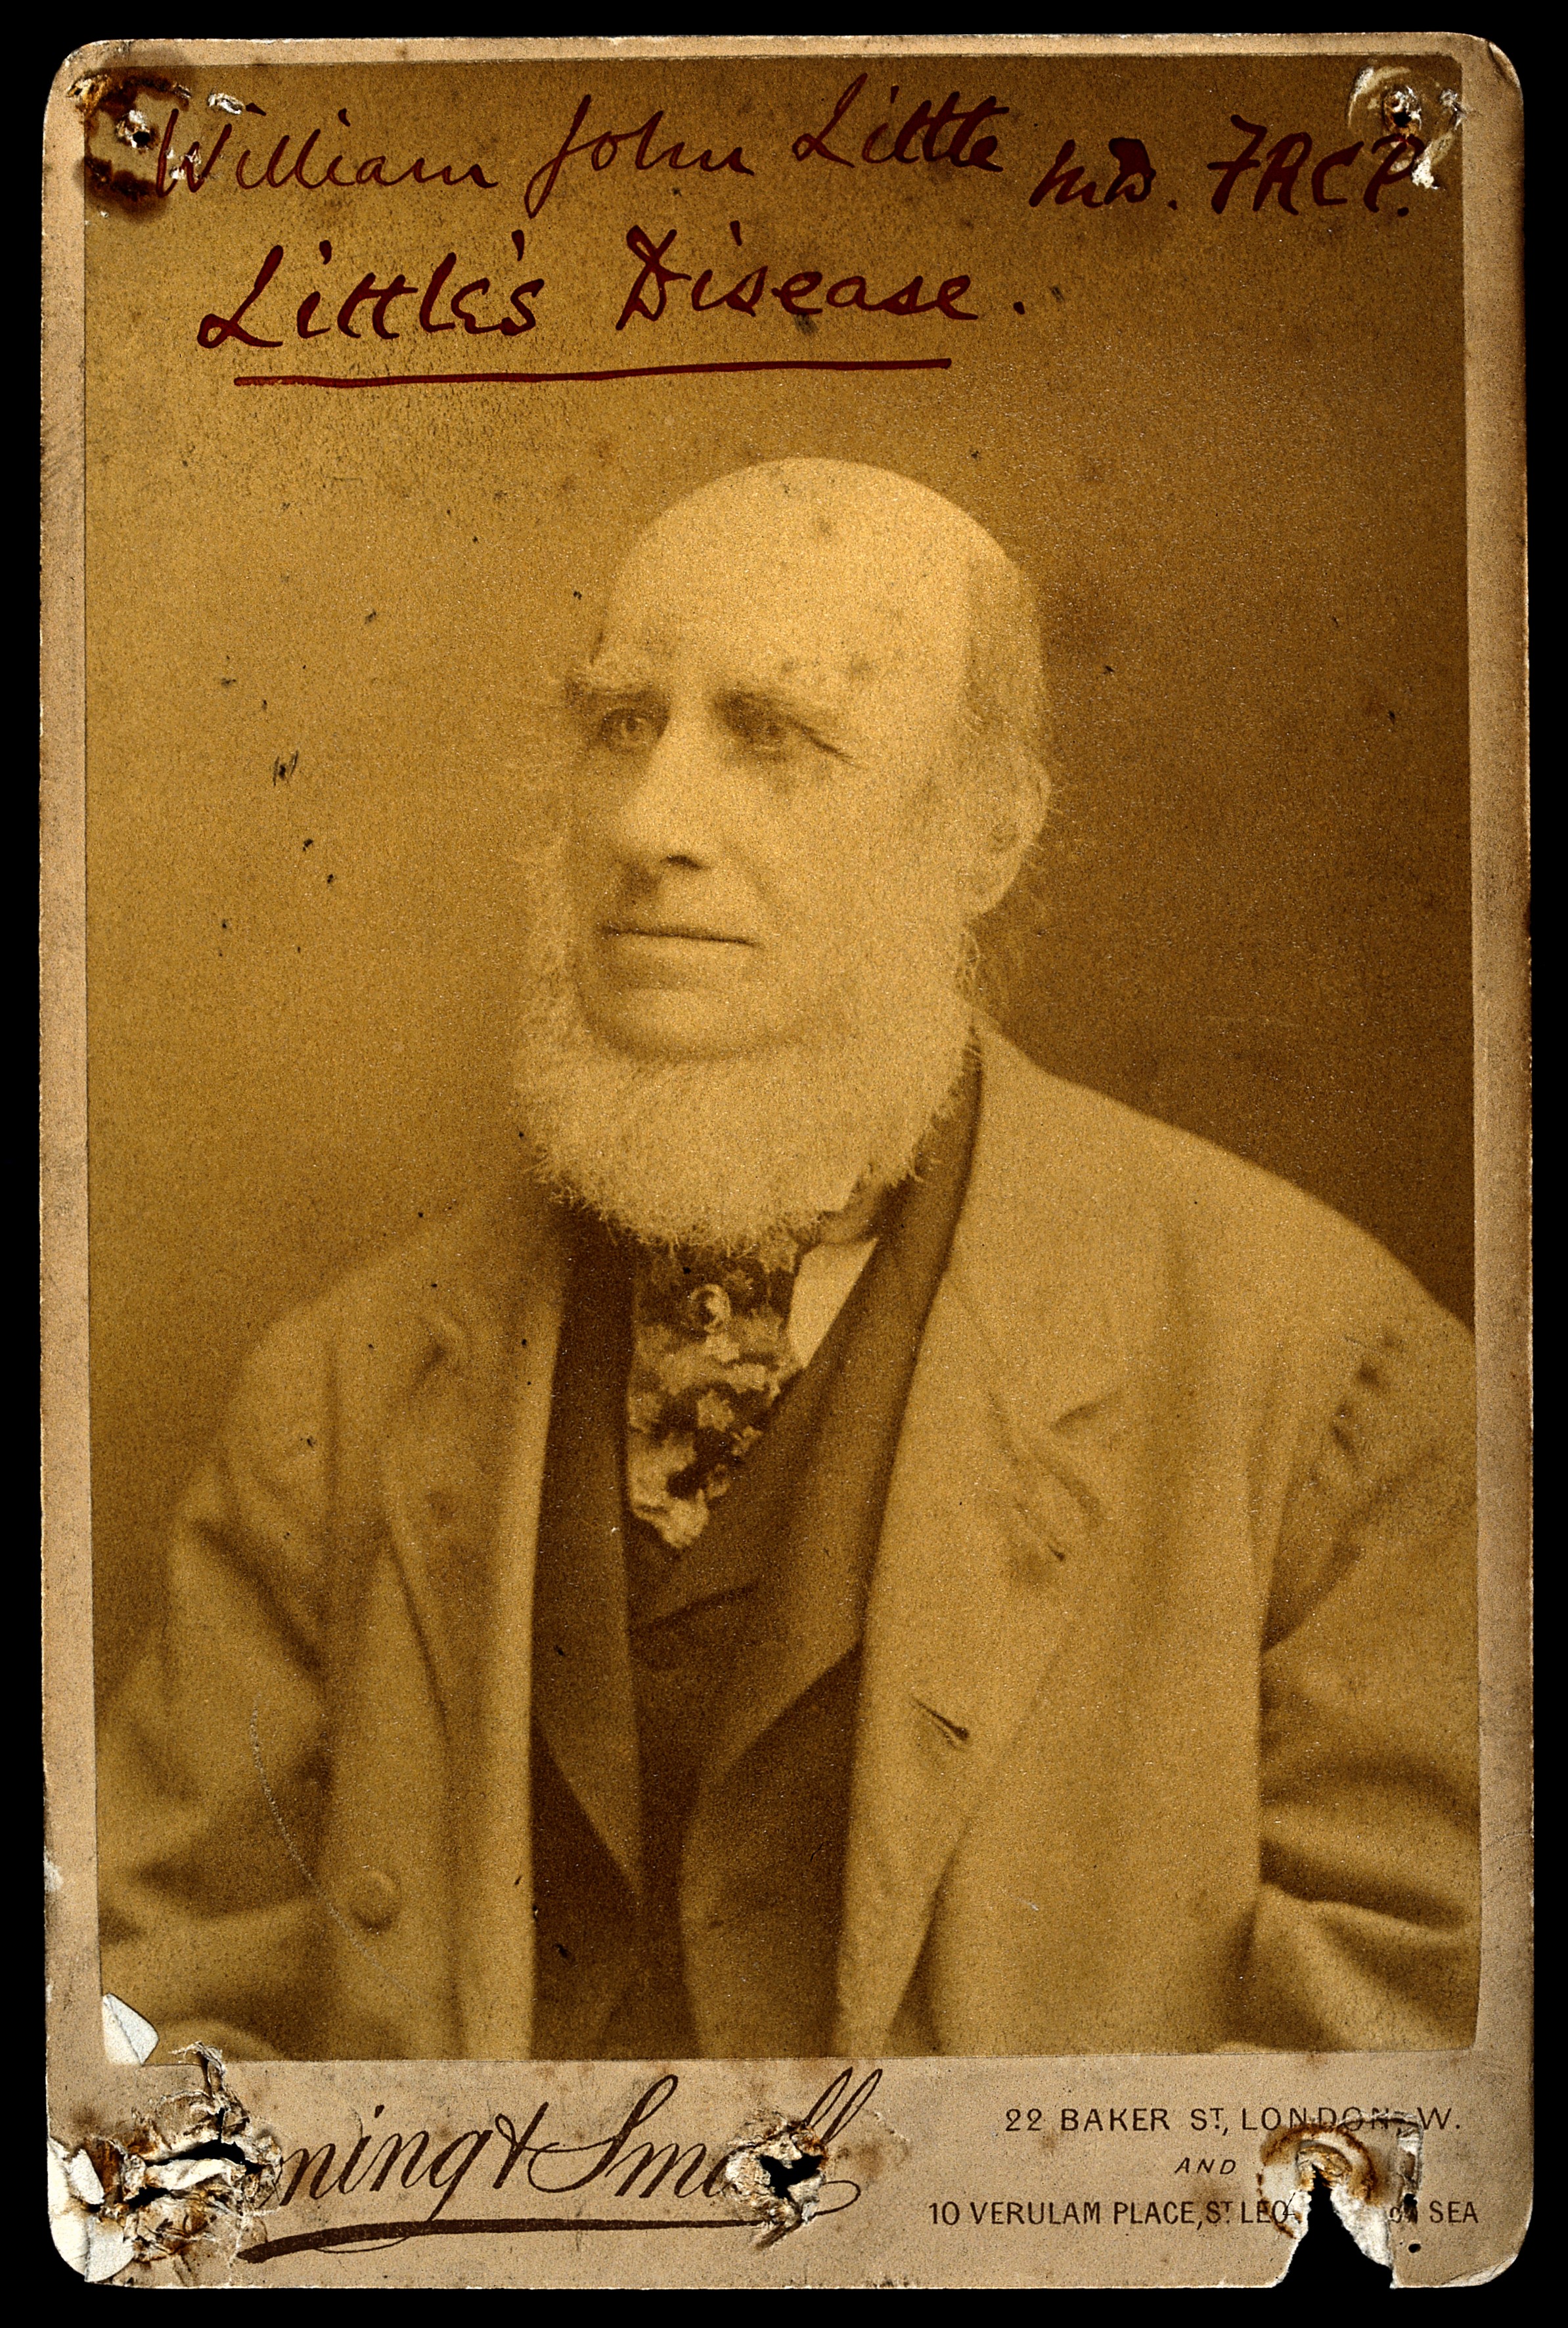 William John Little. Photograph by Boning & Small. Wellcome V0026720